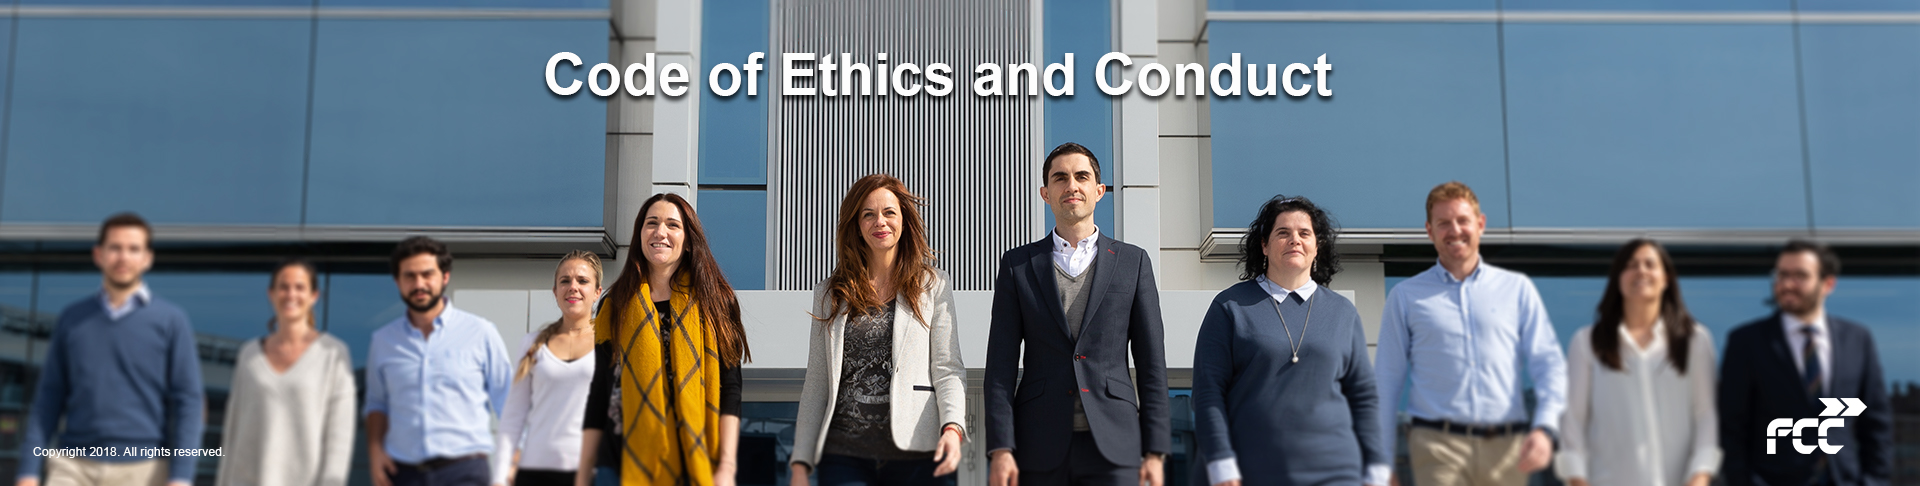 Code of ethics and conduct (Opens pdf file in new tab)